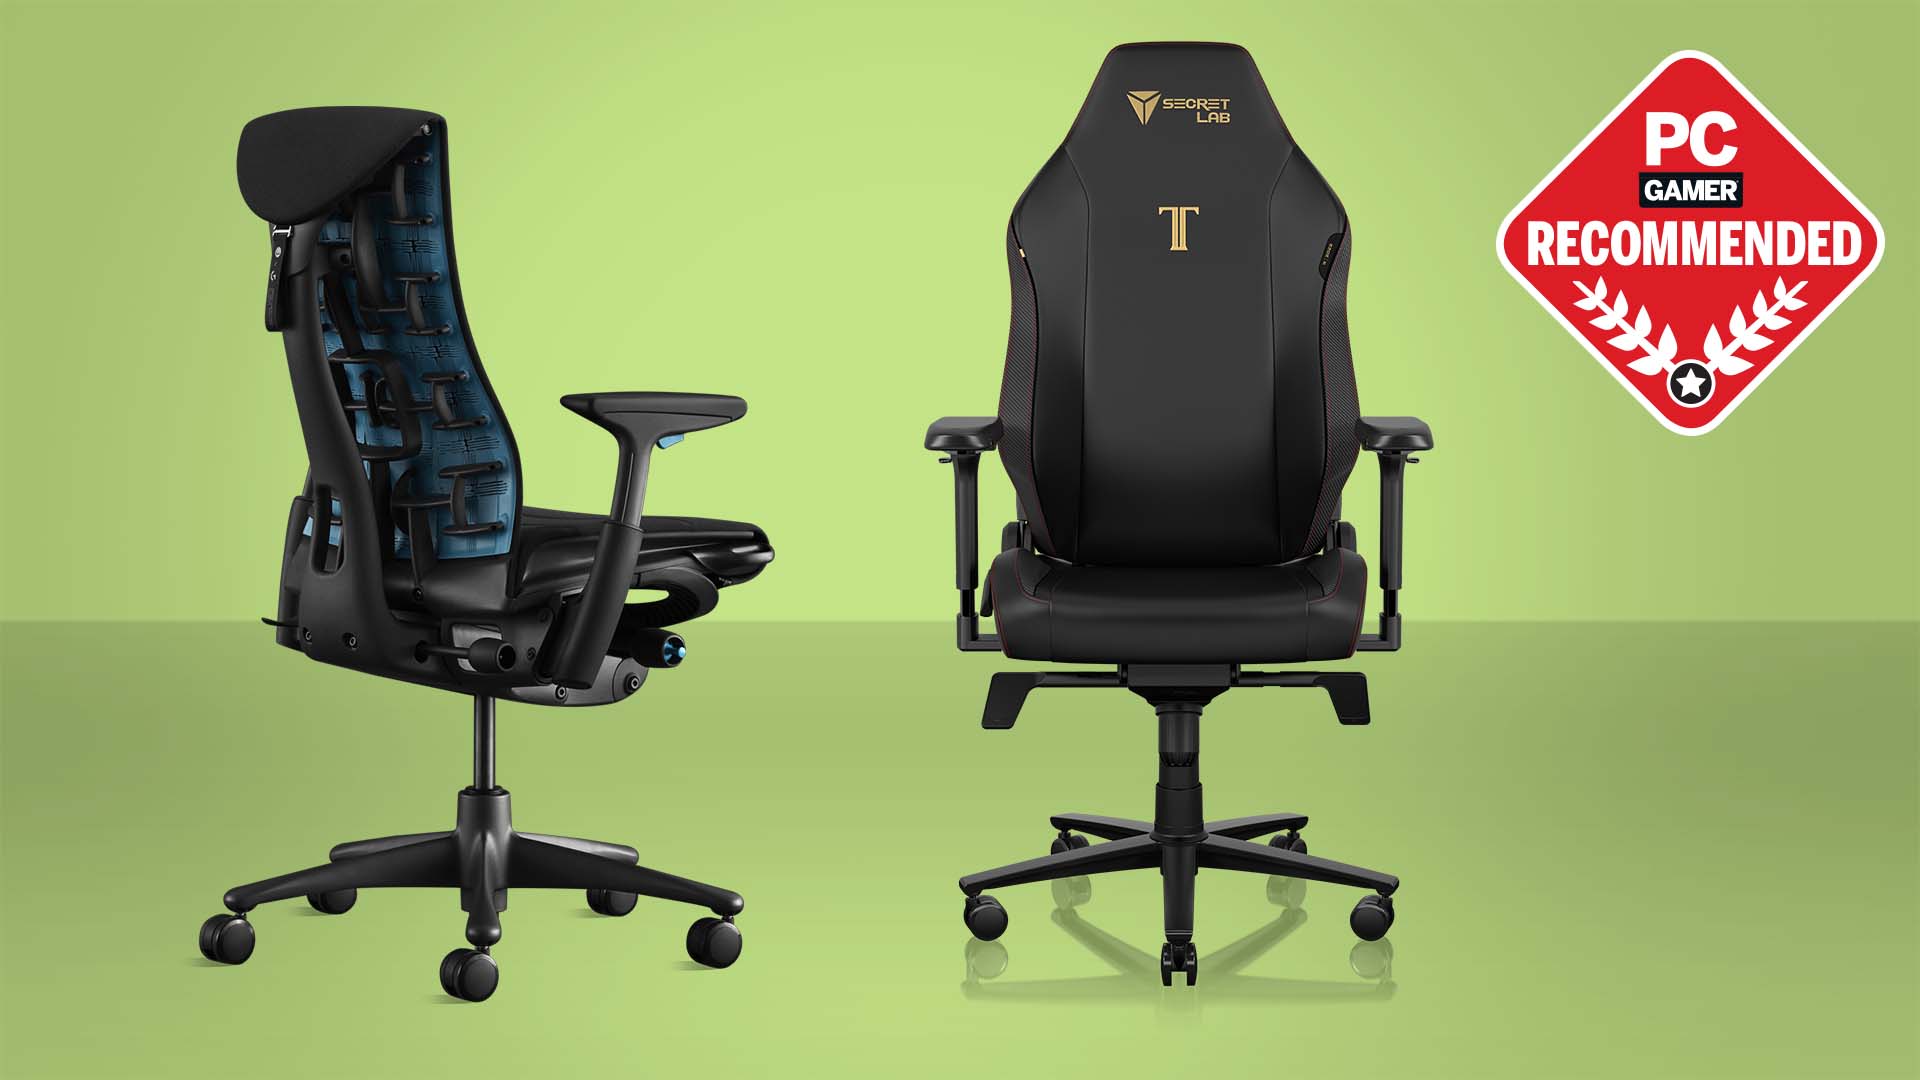 Scorpion Best gaming chair below 300 with Sporty Design